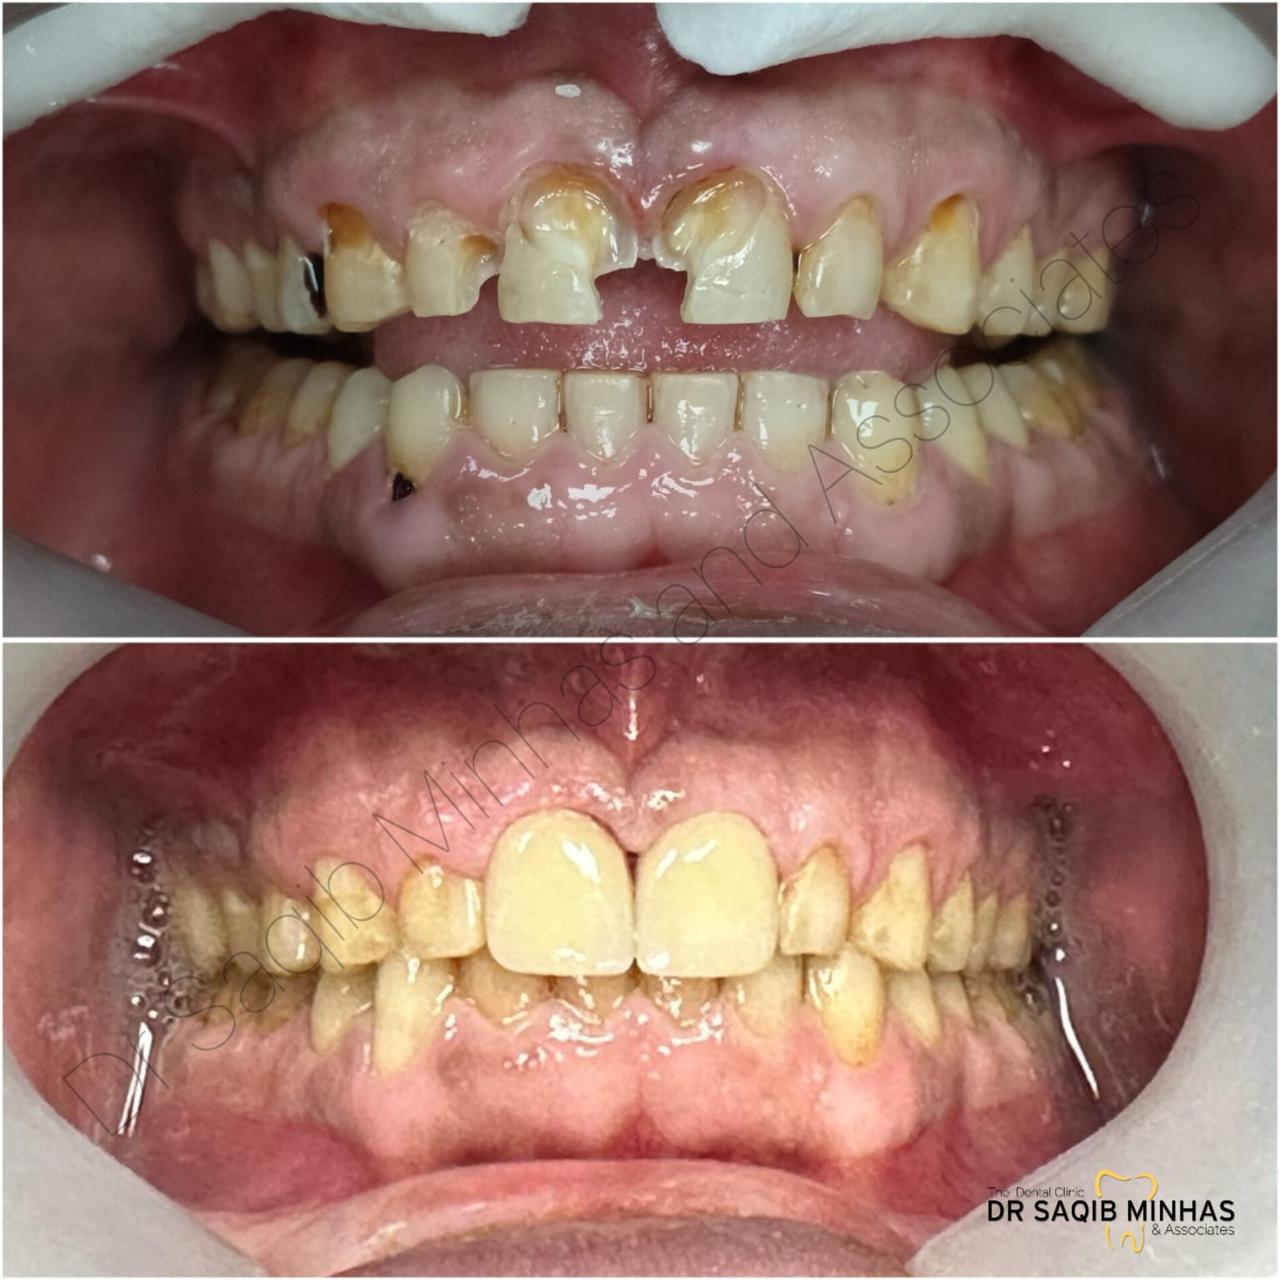 Restored Smile With Fillings & Zirconium Crowns